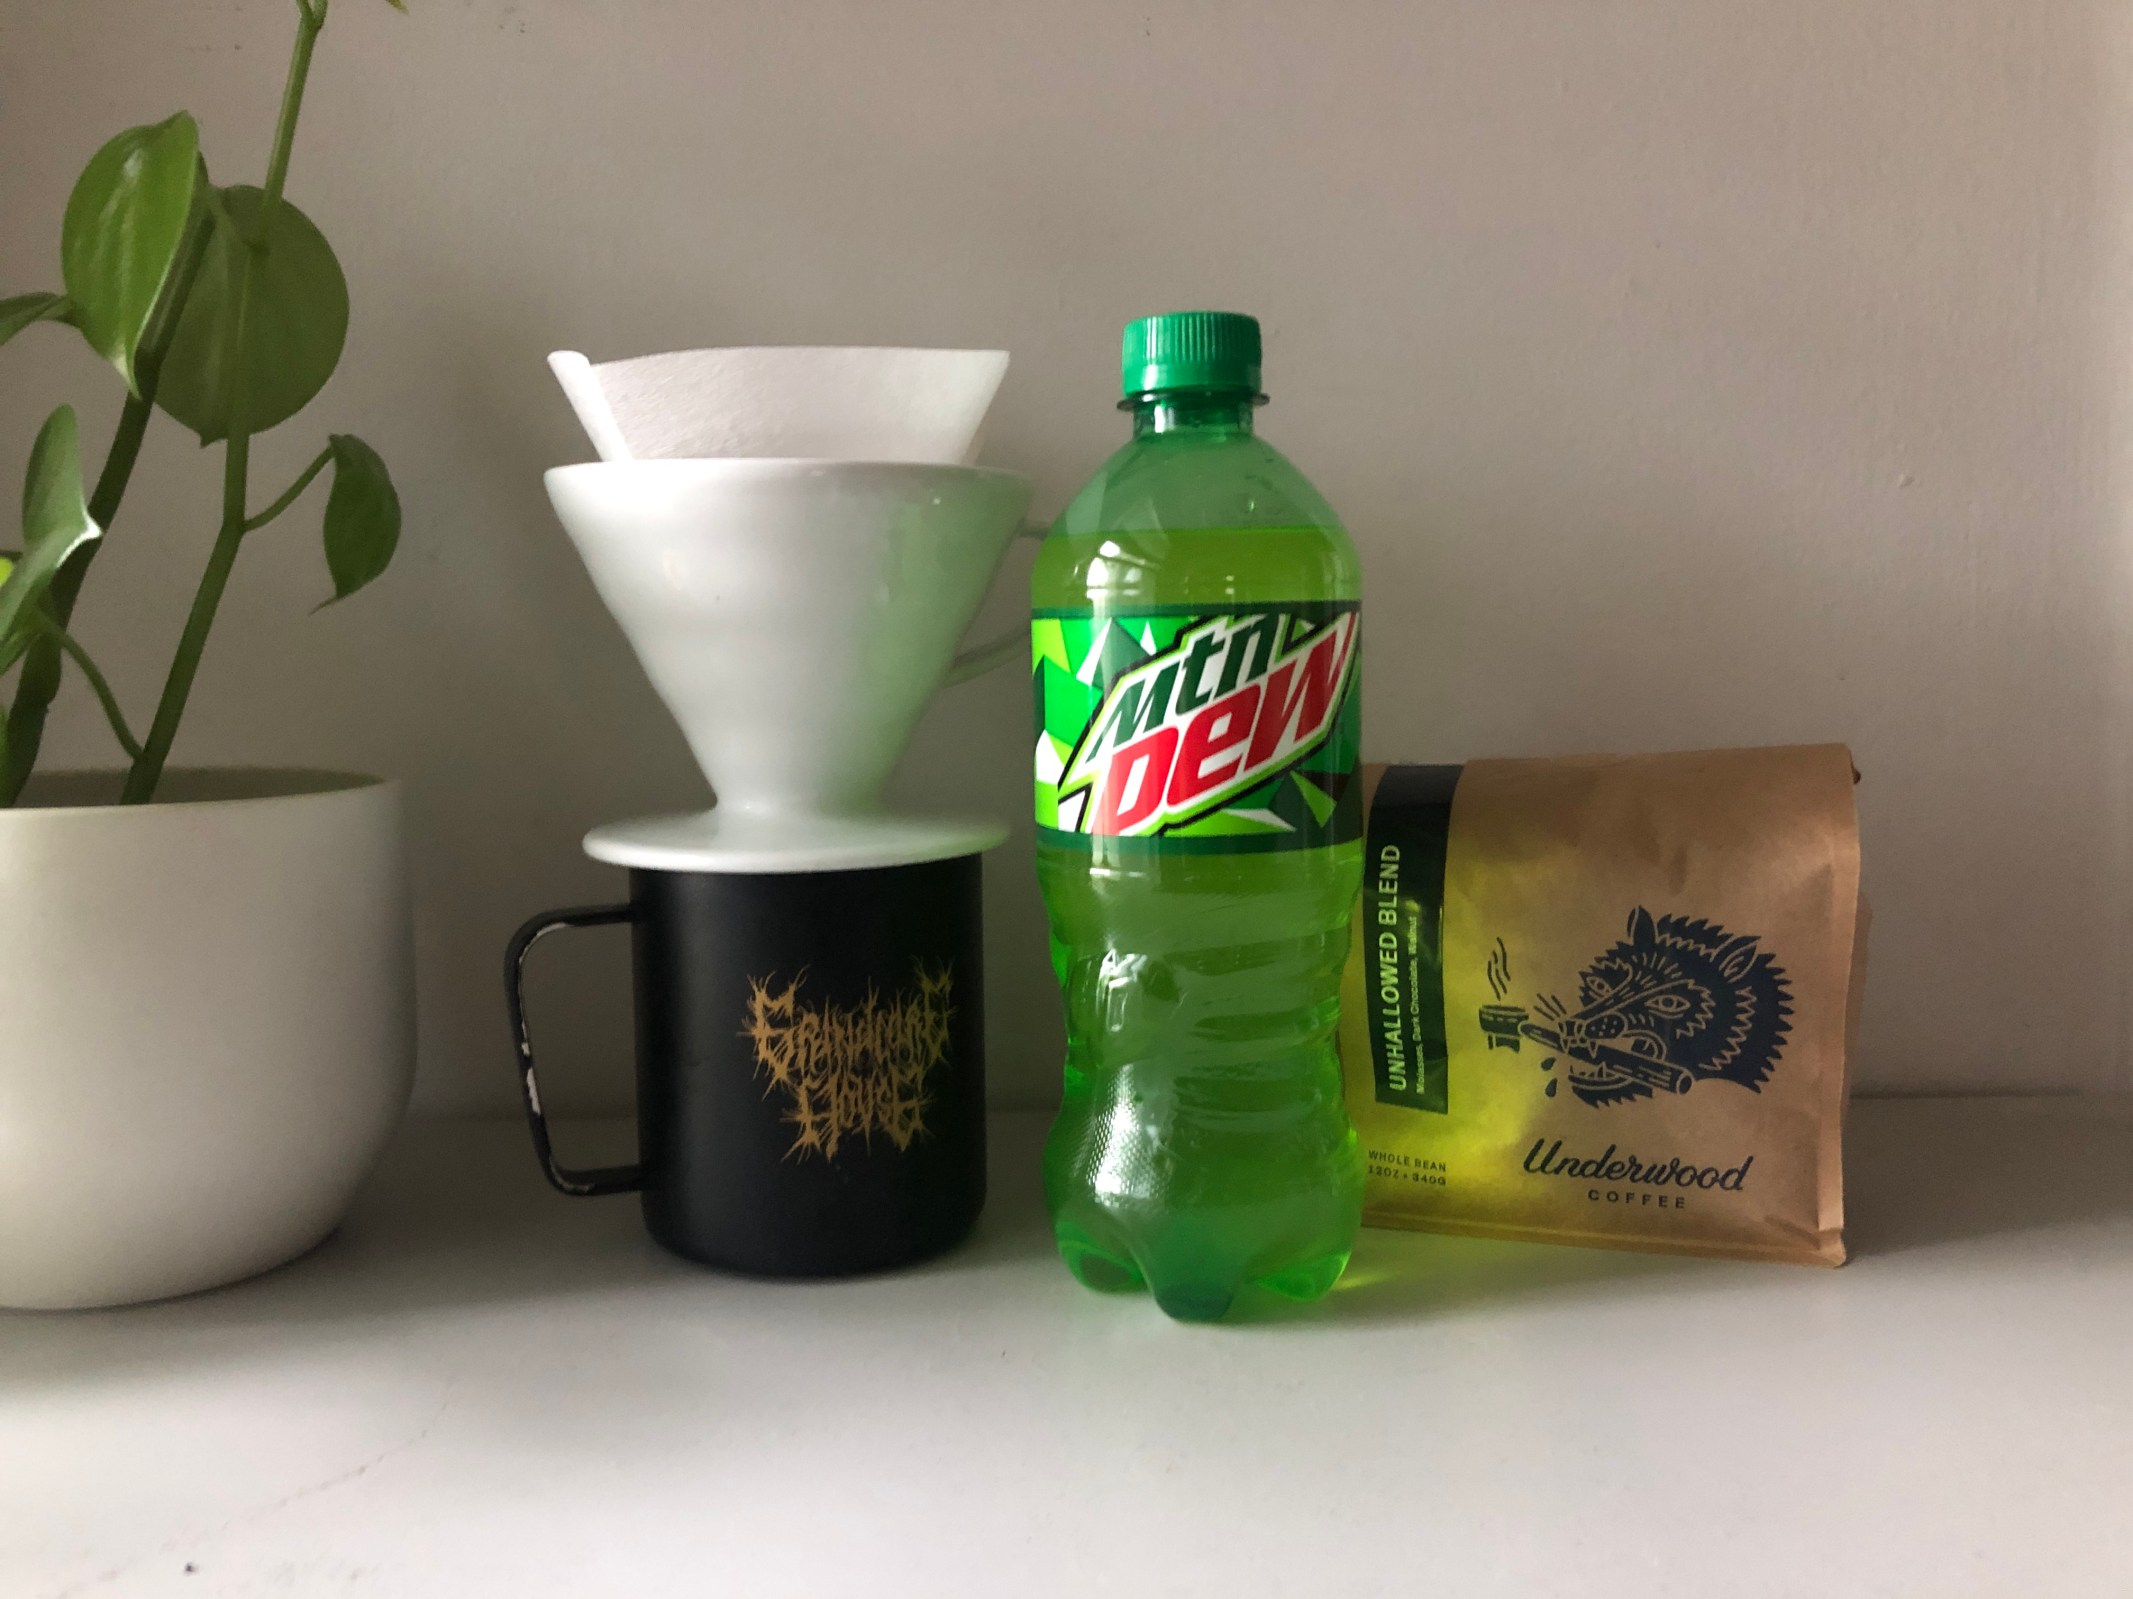 A lime-green bottle of Mountain Dew next to a bag of coffee beans and a pourover and mug.